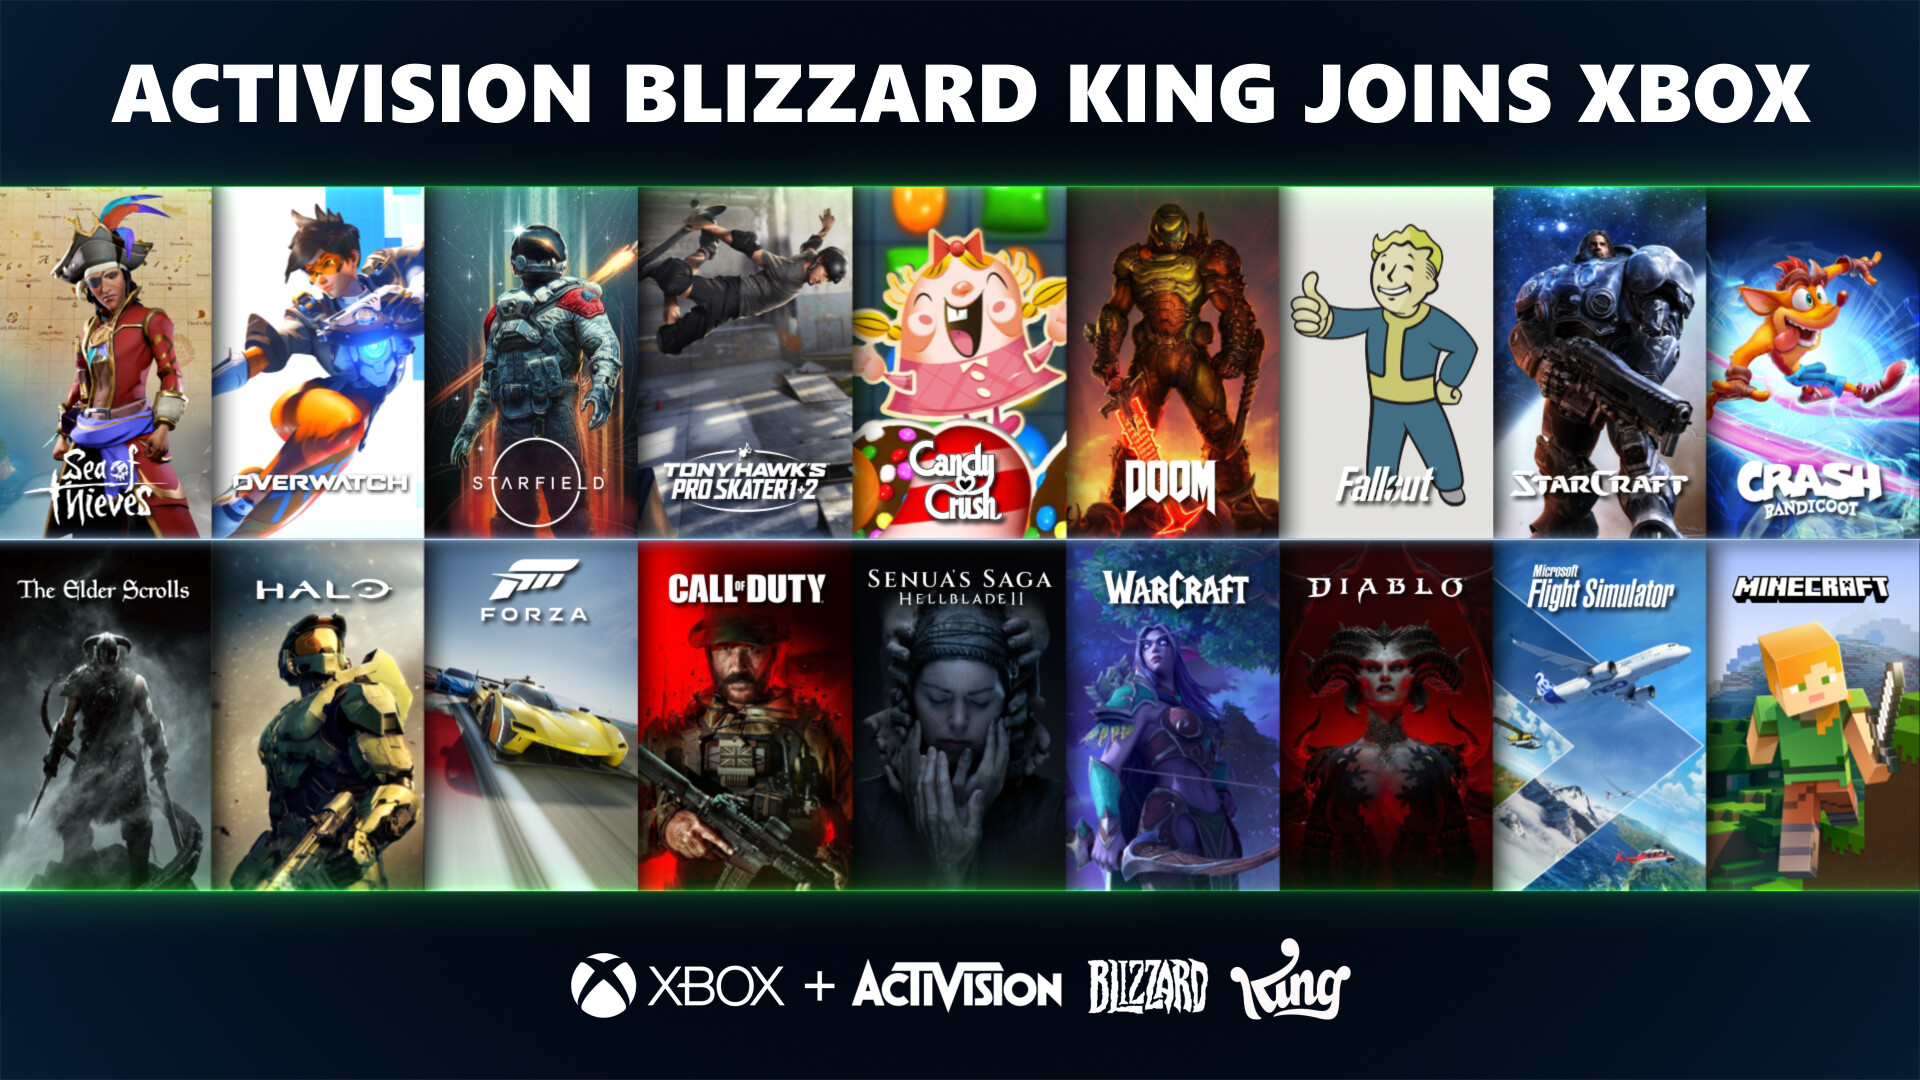 Microsoft Sony Pays For Blocking Rights To Keep Games Off Xbox Game Pass  Activision Blizzard Acquisition Deal Brazil Cade Filing Documents